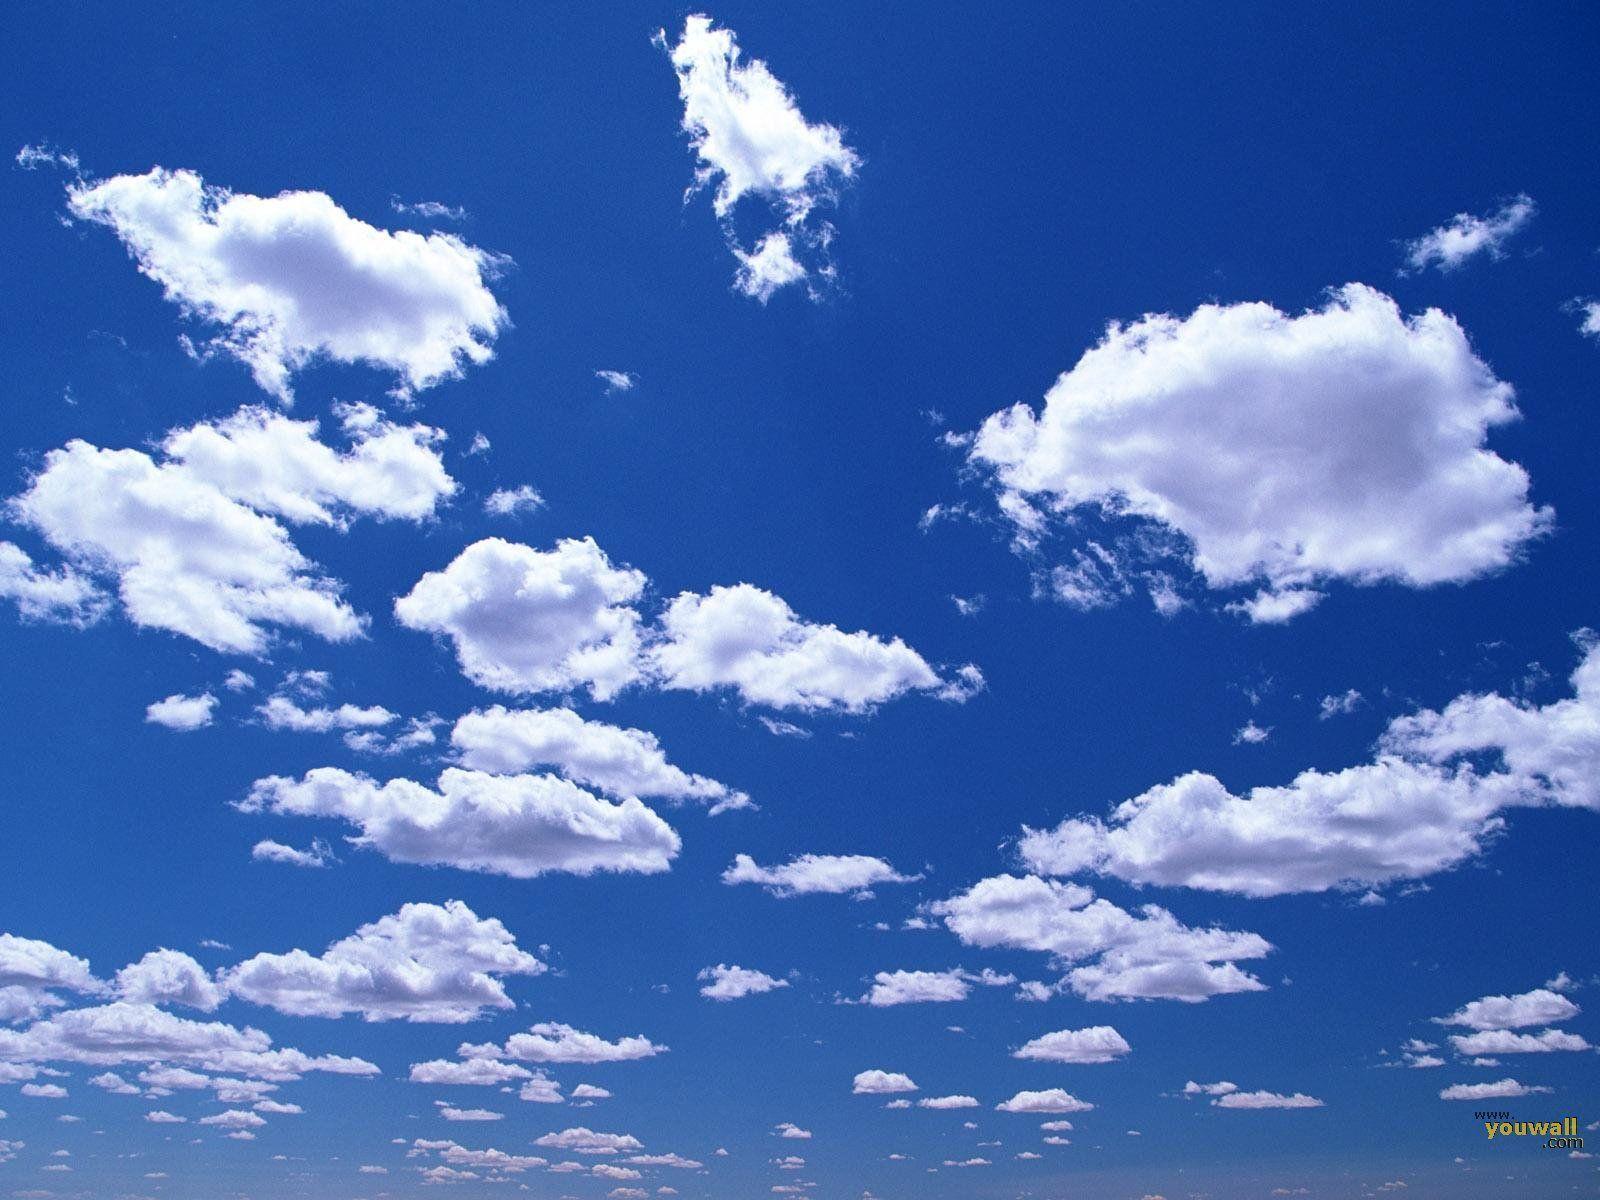 The average cloud weighs approximately 1.1 million pounds. Trivia